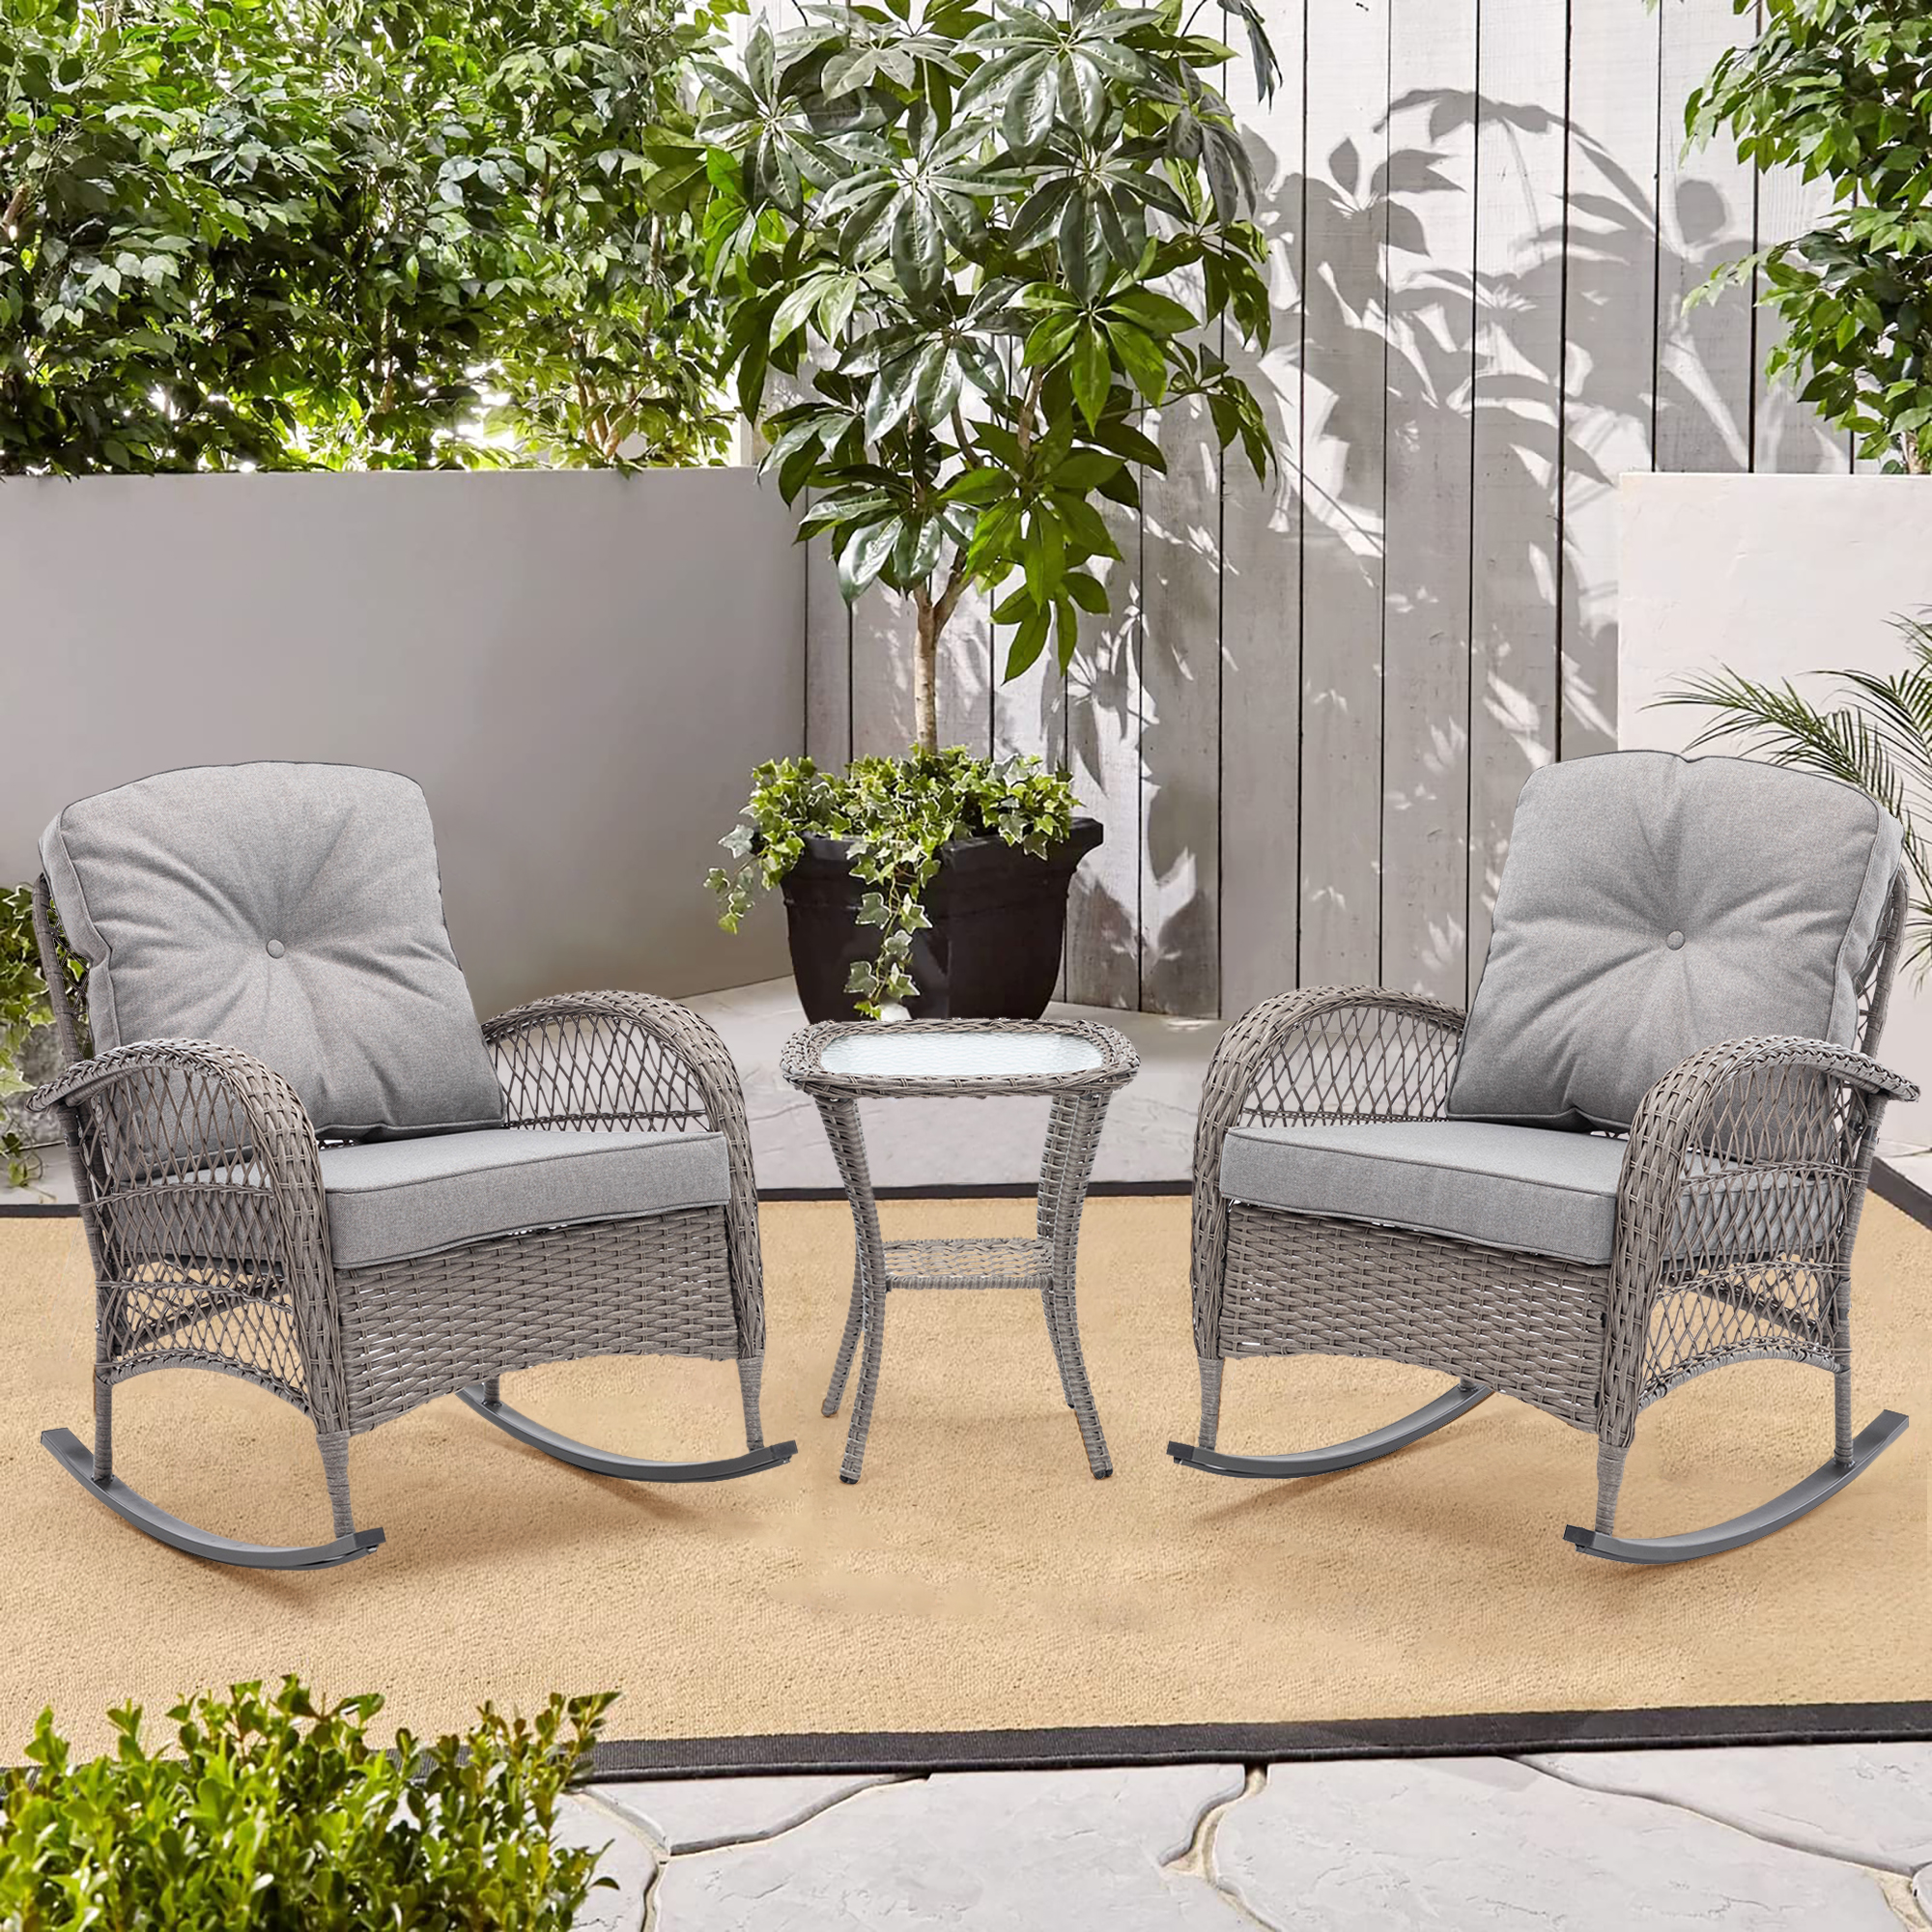 Royard Oaktree 3-Piece Patio Rocking Chair Outdoor Rattan Bistro Furniture Conversation Set with 2 Wicker Armchair and Glass Table for Porch Lawn Garden Backyard,Grey - image 1 of 7